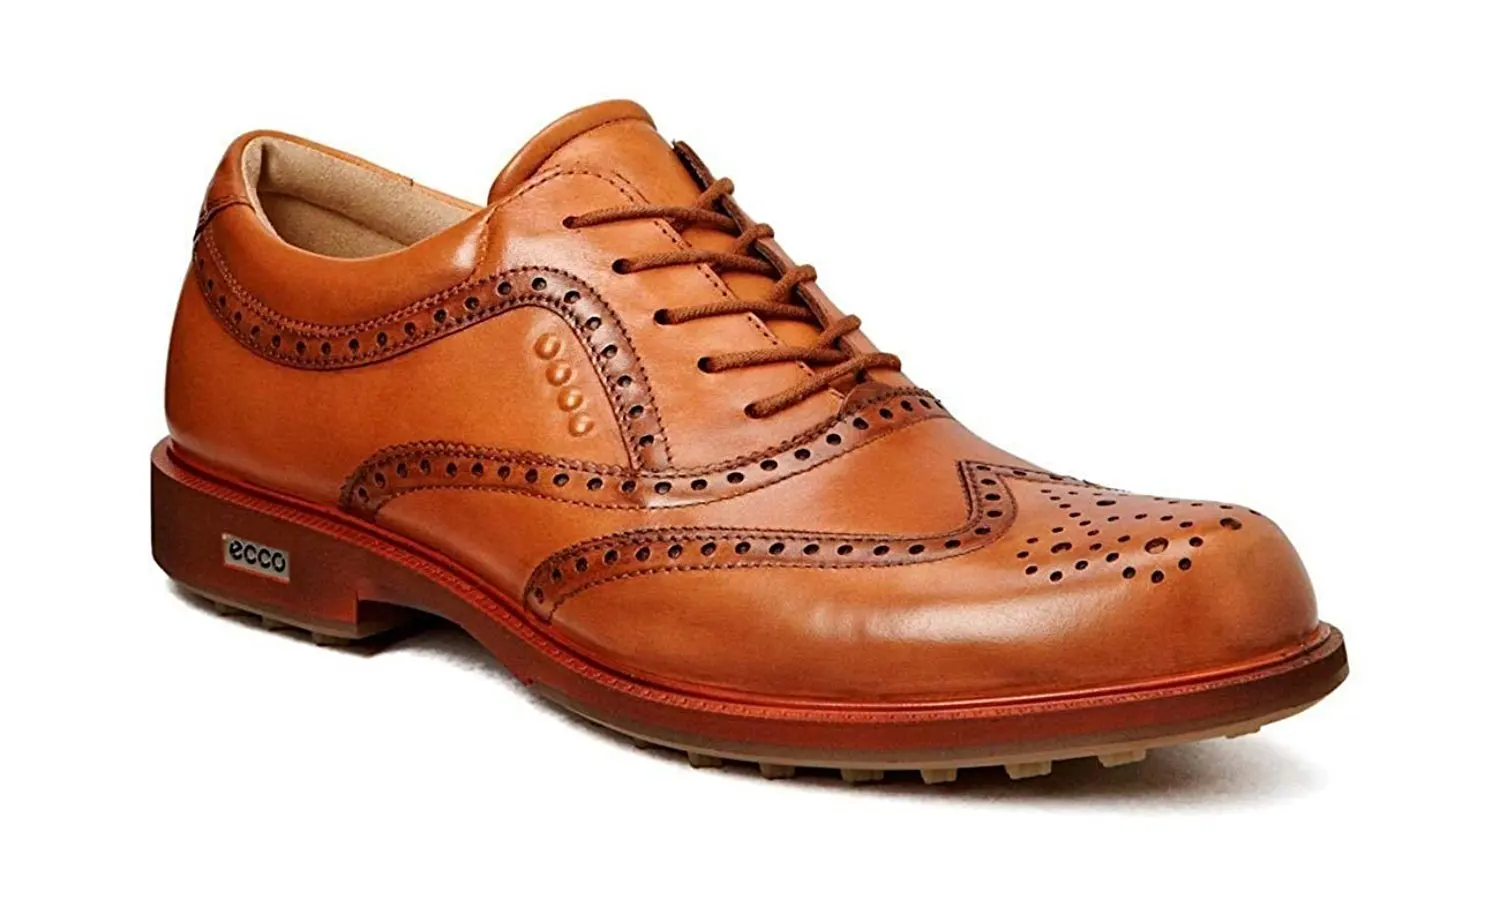 wingtip golf shoes for sale